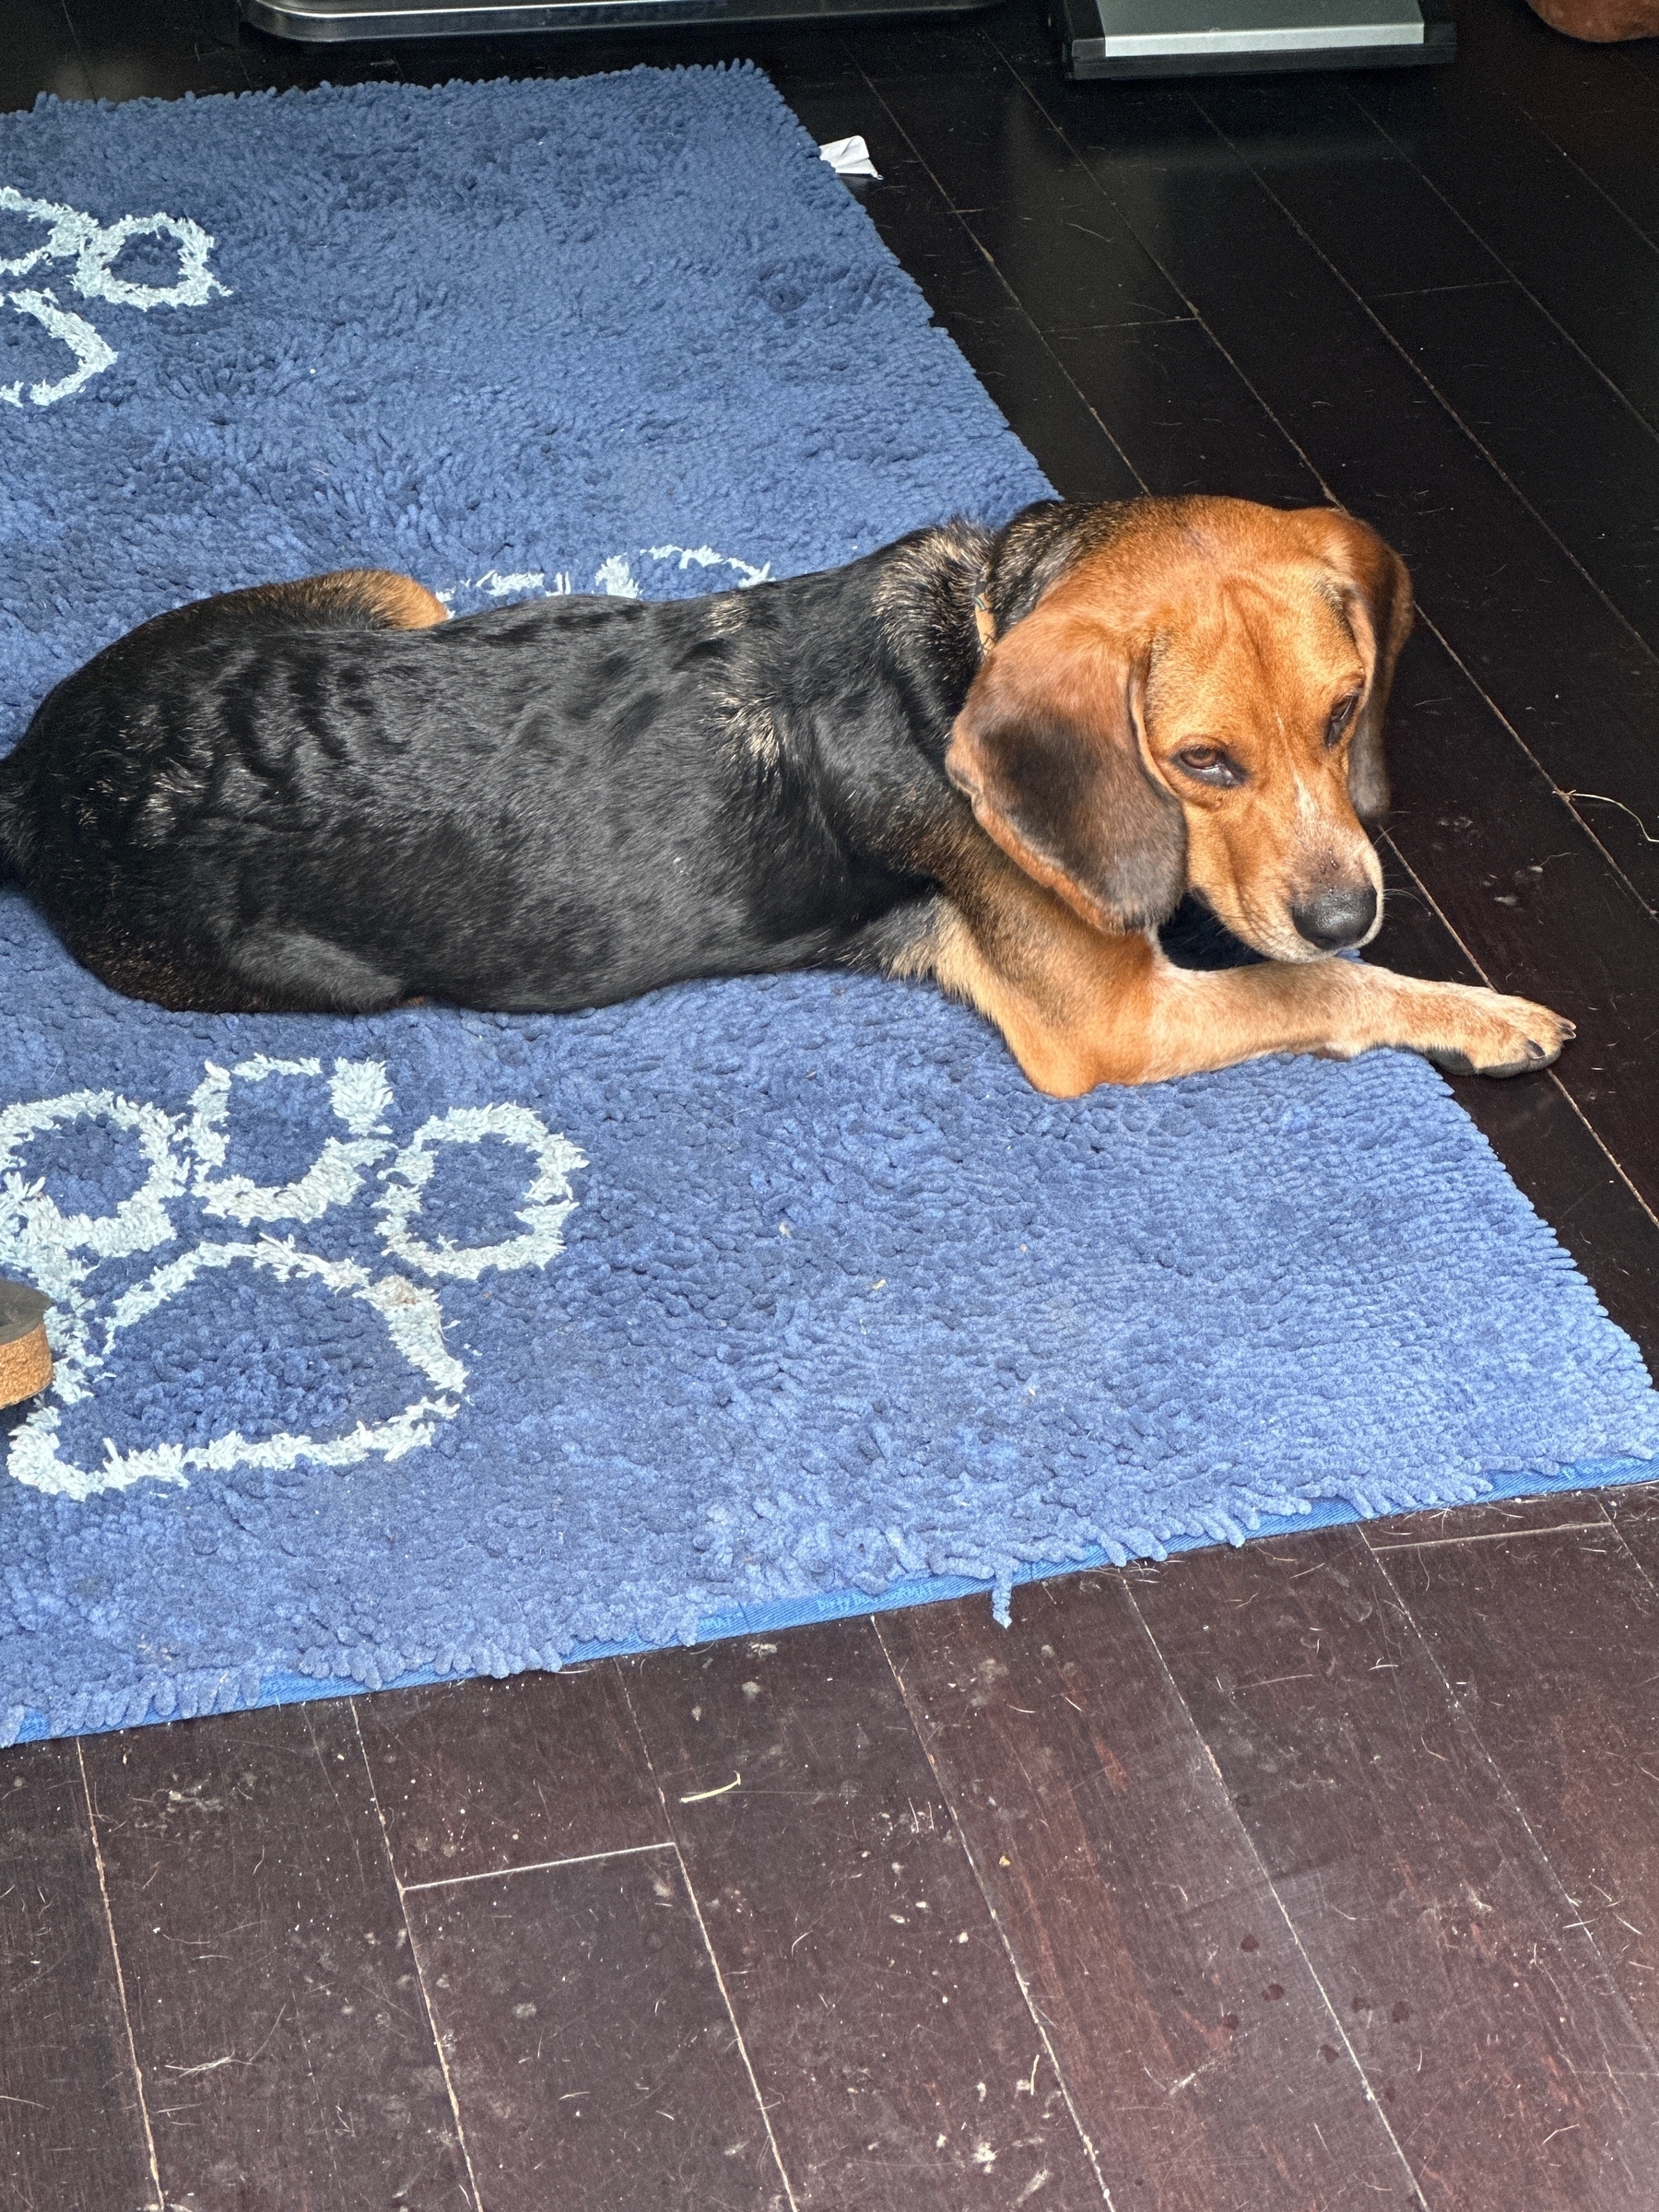 Scooby the bluetick bagel (we think, look at those paws! basset+beagle=bagel) in a down on a blue rug, having some downtime at home with just mom. 